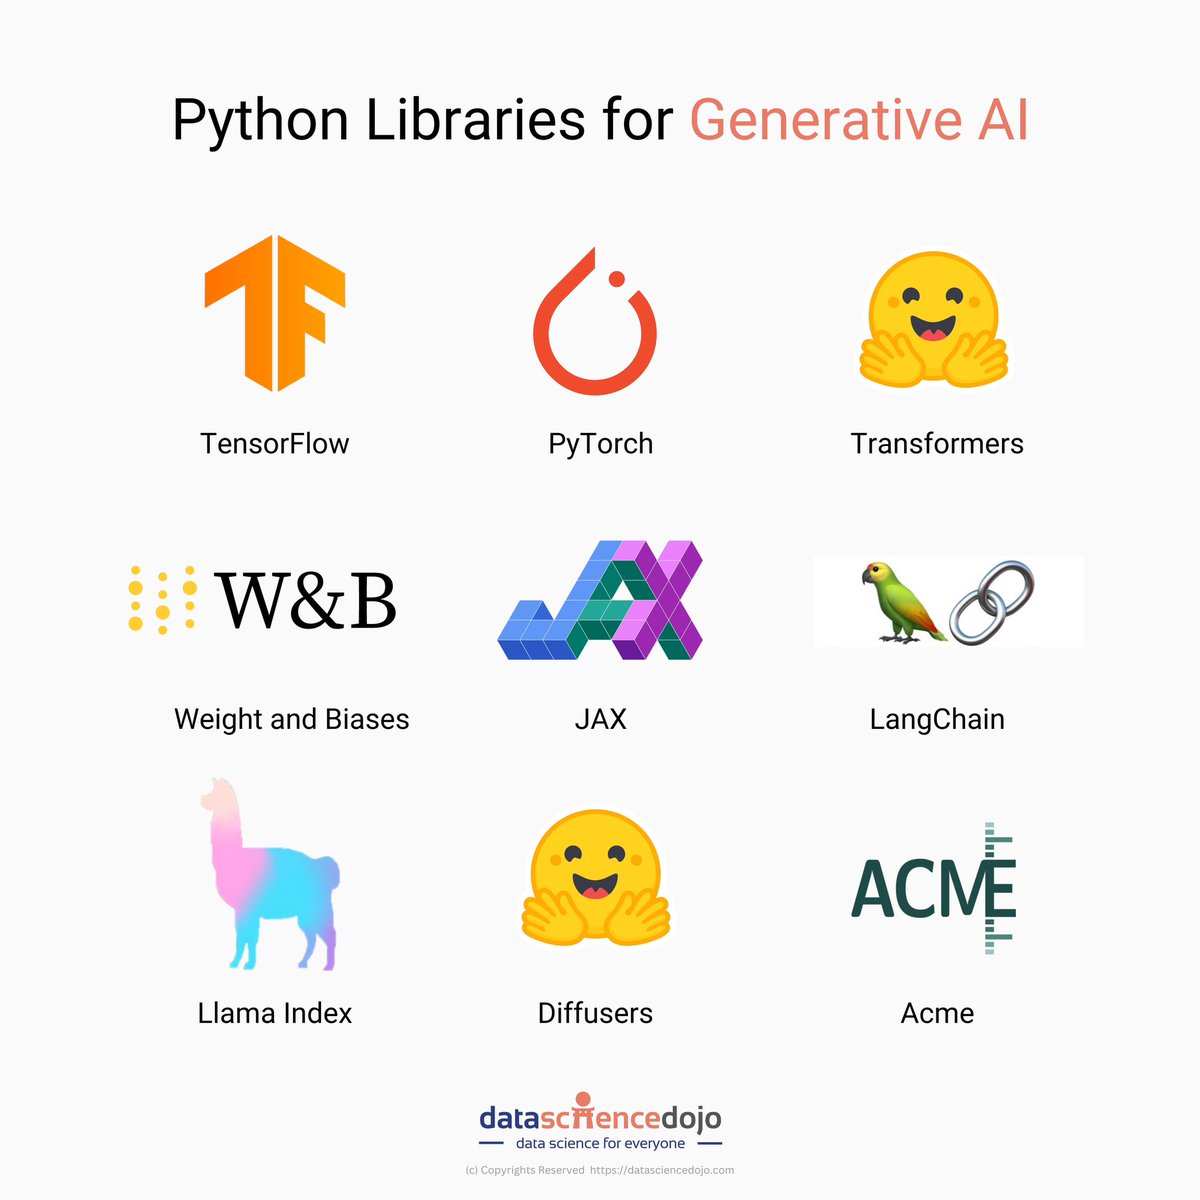 💥 Python is a popular programming language for generative AI, as it has a wide range of libraries and frameworks available. Here are 10 of the top Python libraries for generative AI:

Source @DataScienceDojo 

#generativeai #python #llms #llmdojo